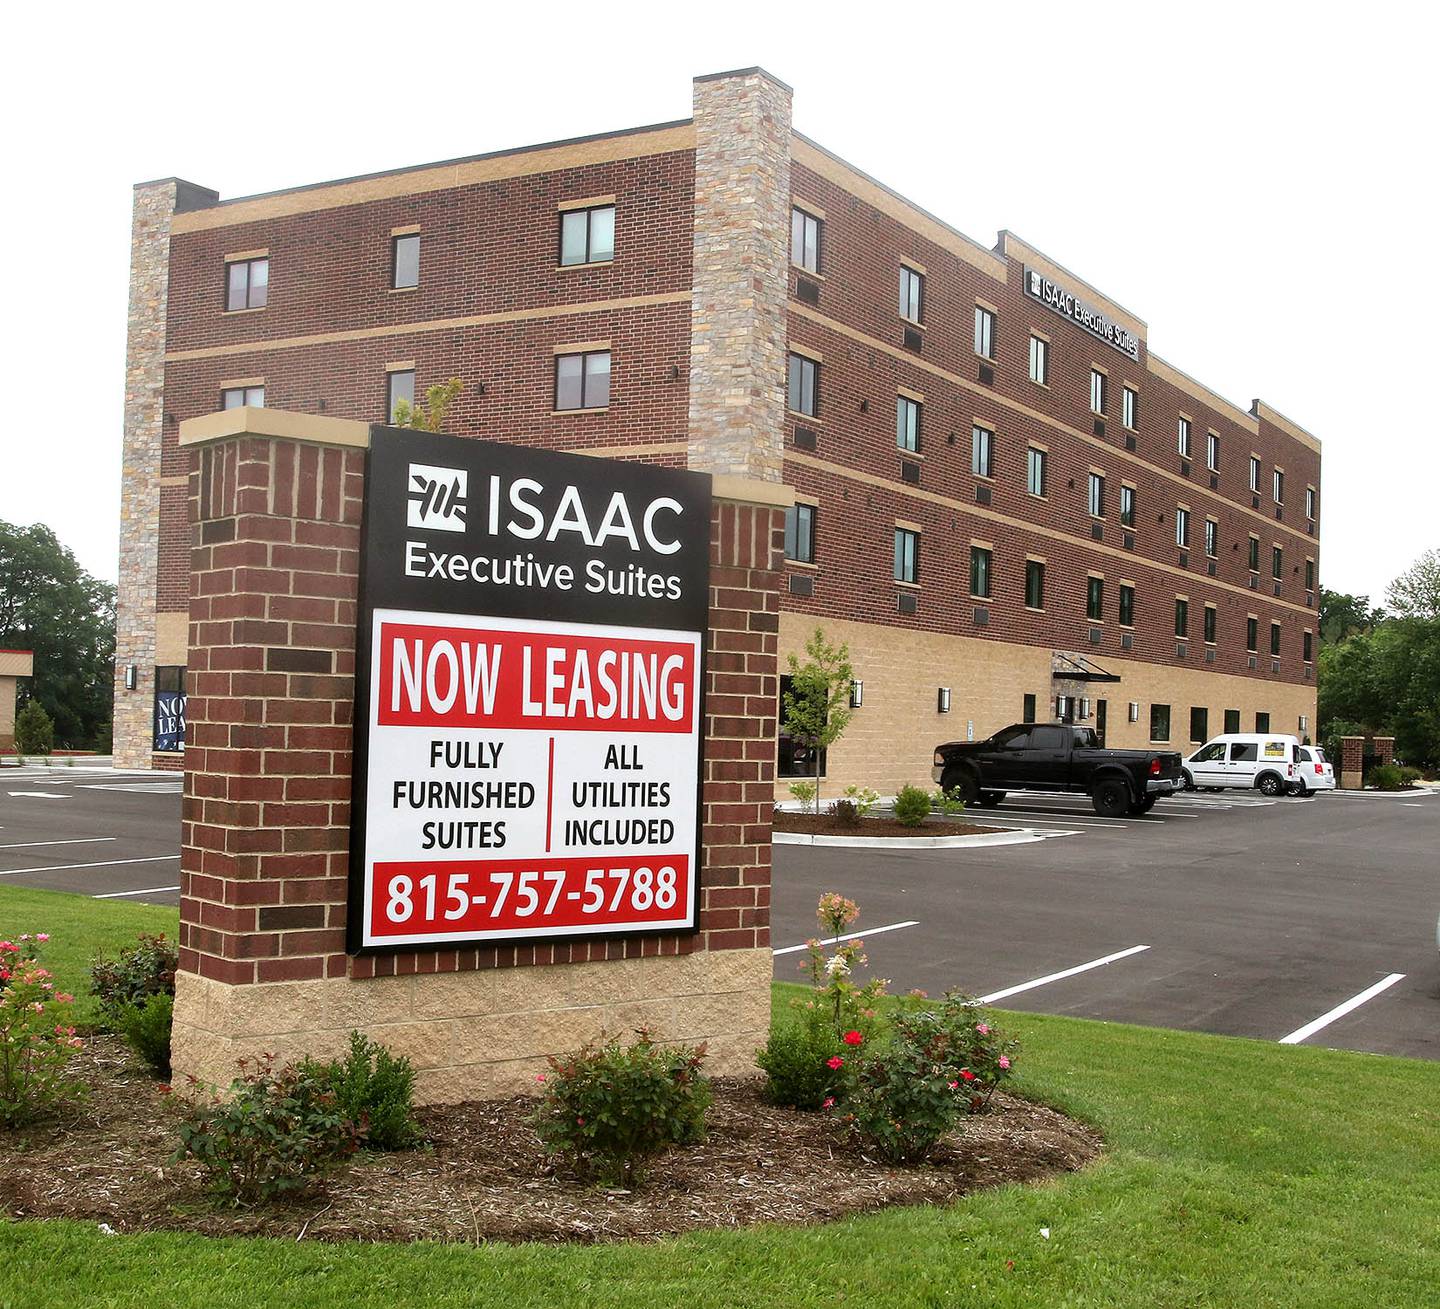 Isaac Executive Suites on Sycamore Road in DeKalb July 16, 2021.